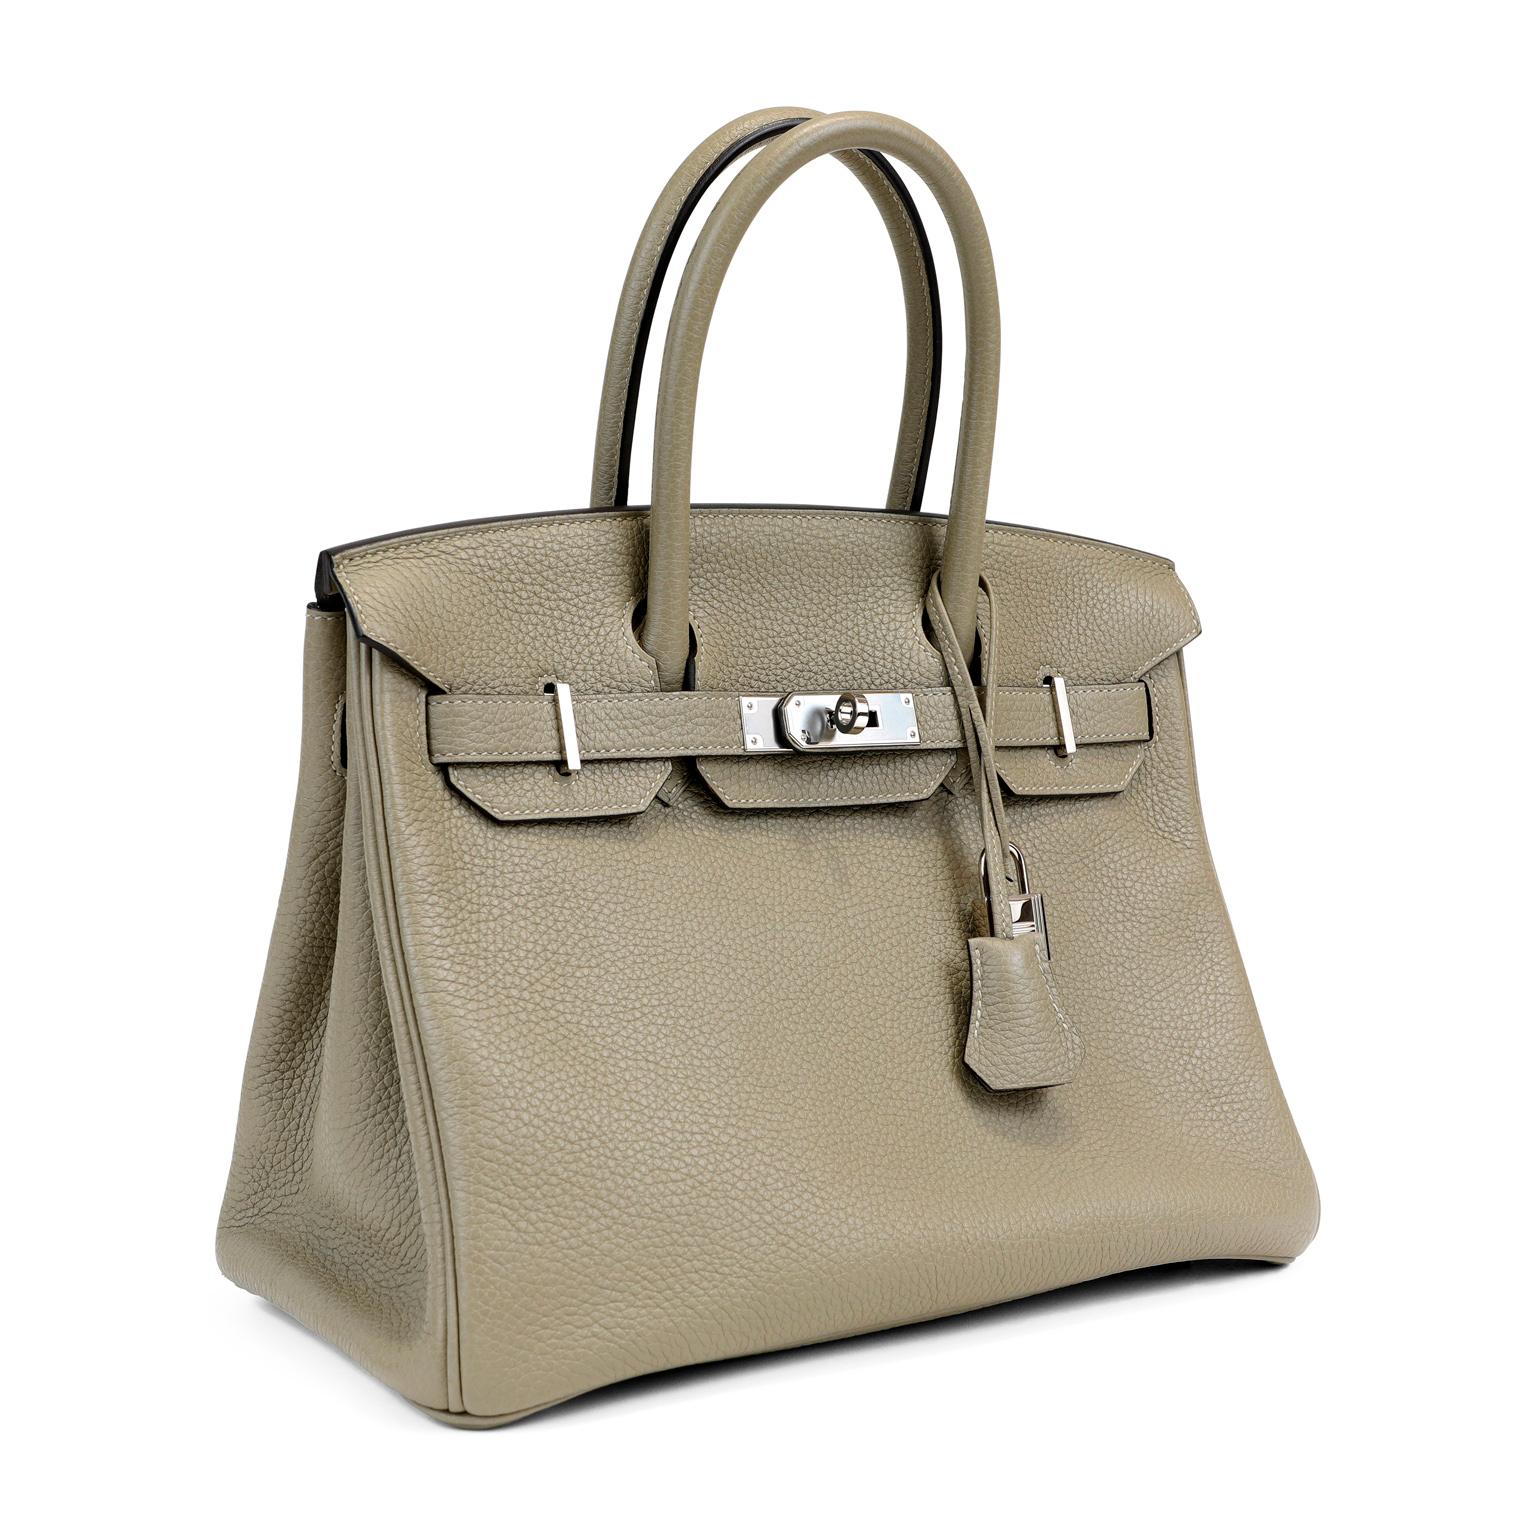 This authentic Hermès Sage Togo Leather 30 cm Birkin Bag is in pristine unworn condition with the protective plastic intact on the hardware.  Waitlists exceeding a year are commonplace for the intensely coveted Birkin.  Each piece is hand crafted by